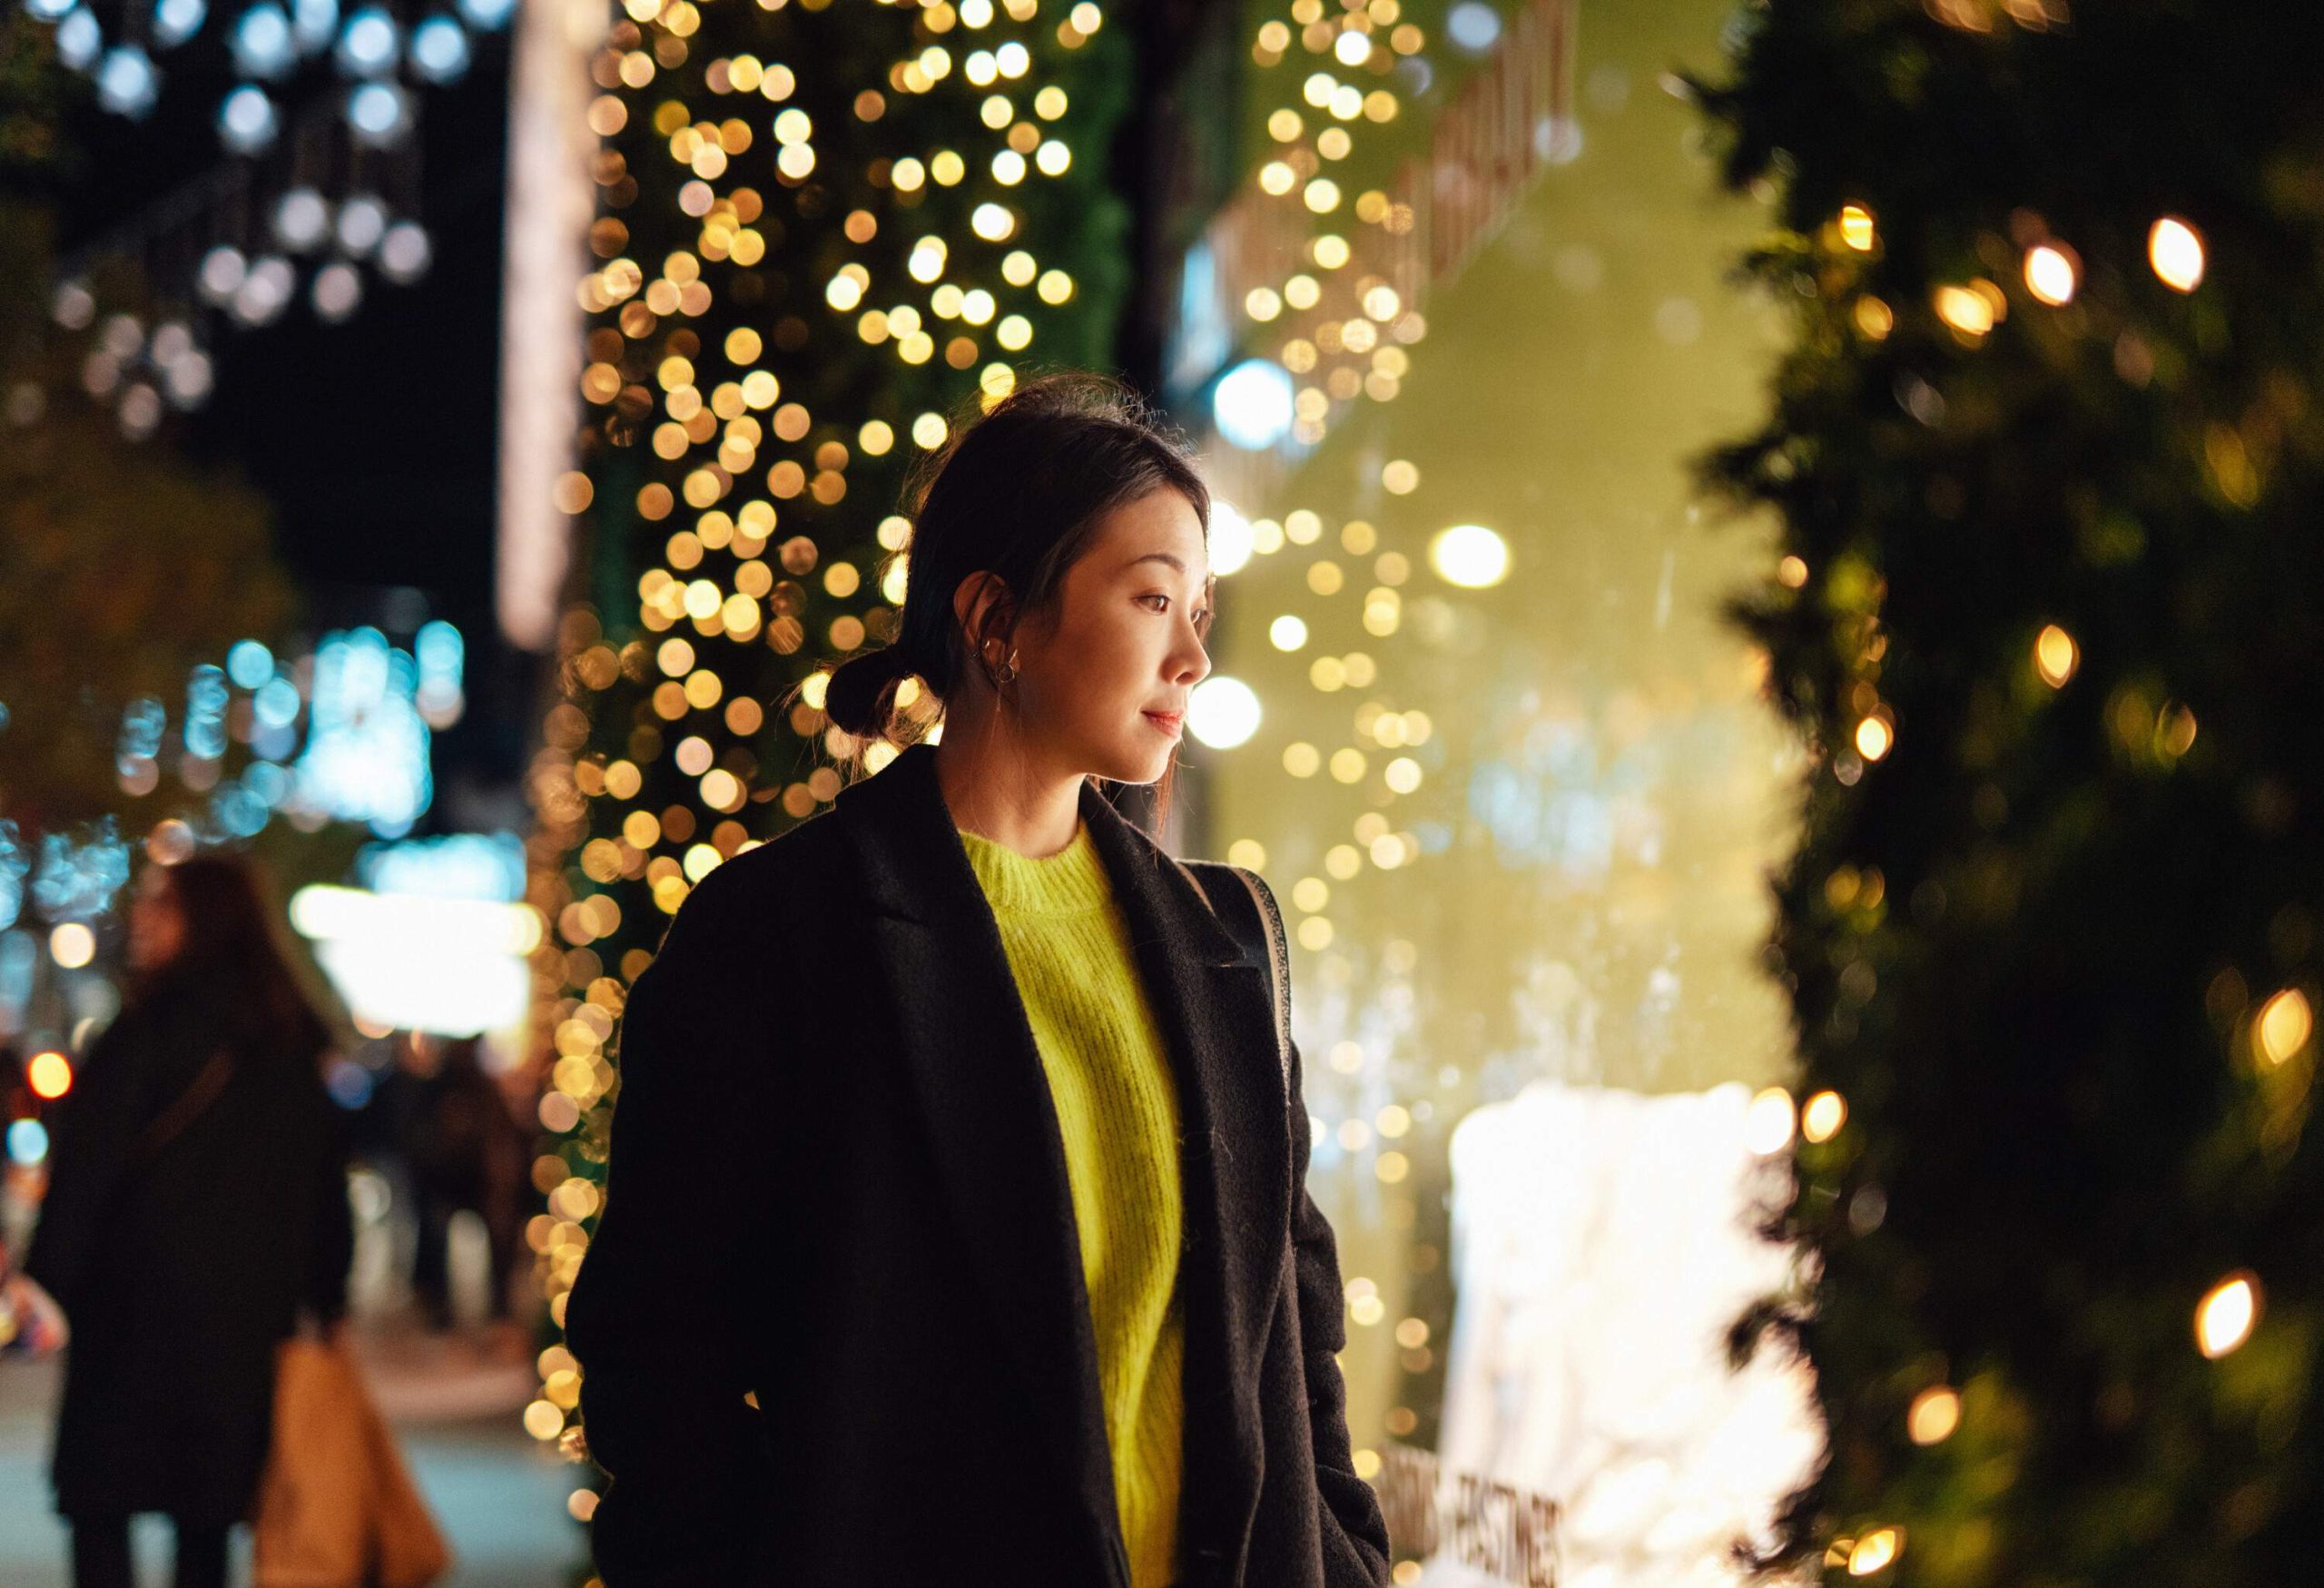 Beautiful young Asian woman look through shop window at night, with illuminated fairy lights in the background. Christmas shopping.